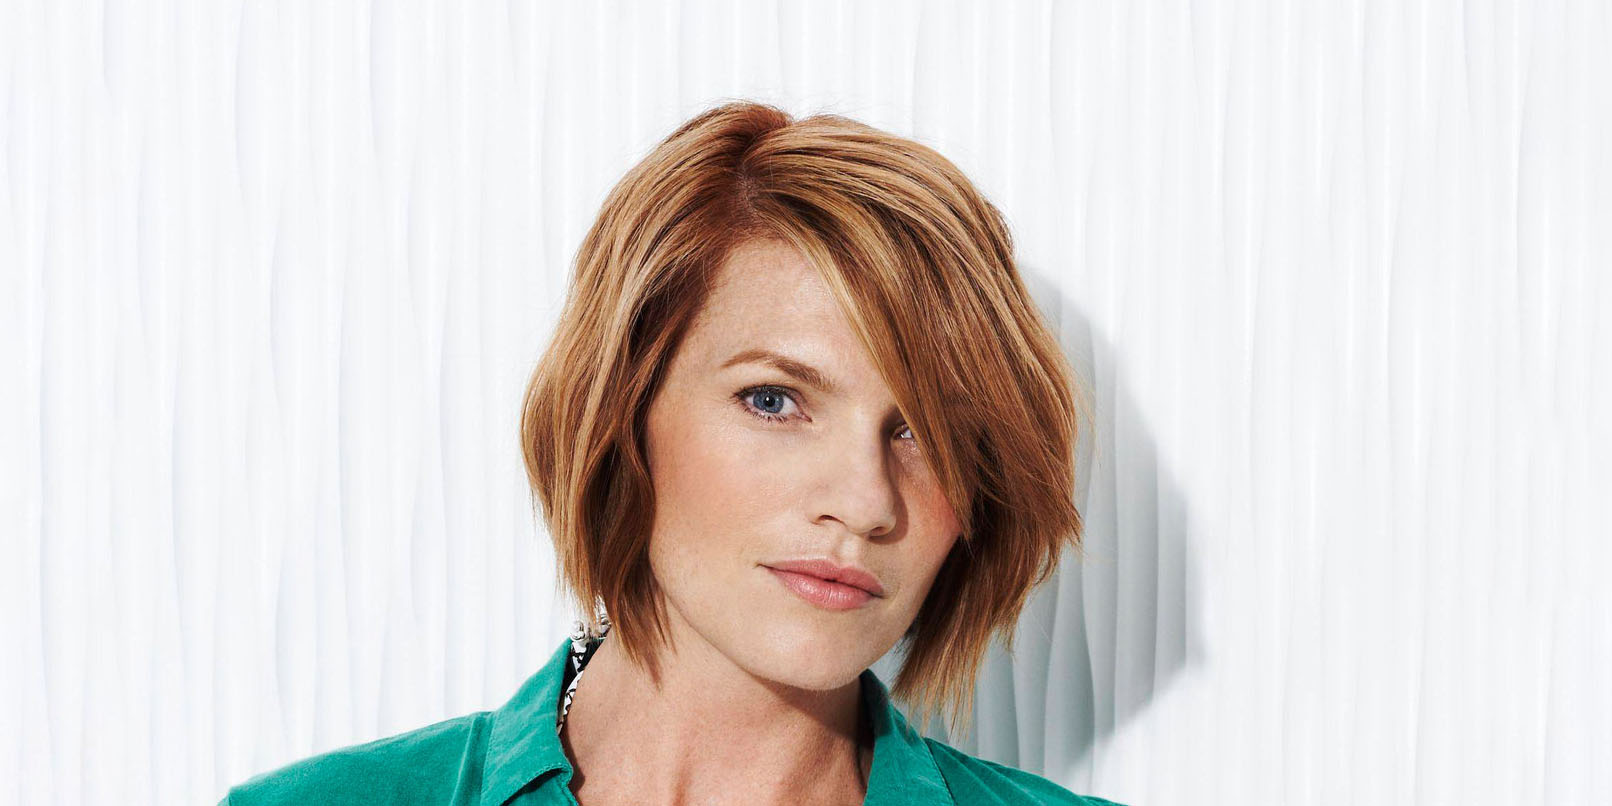 All About Kathleen Rose Perkins: Husband, Age, Appearance.